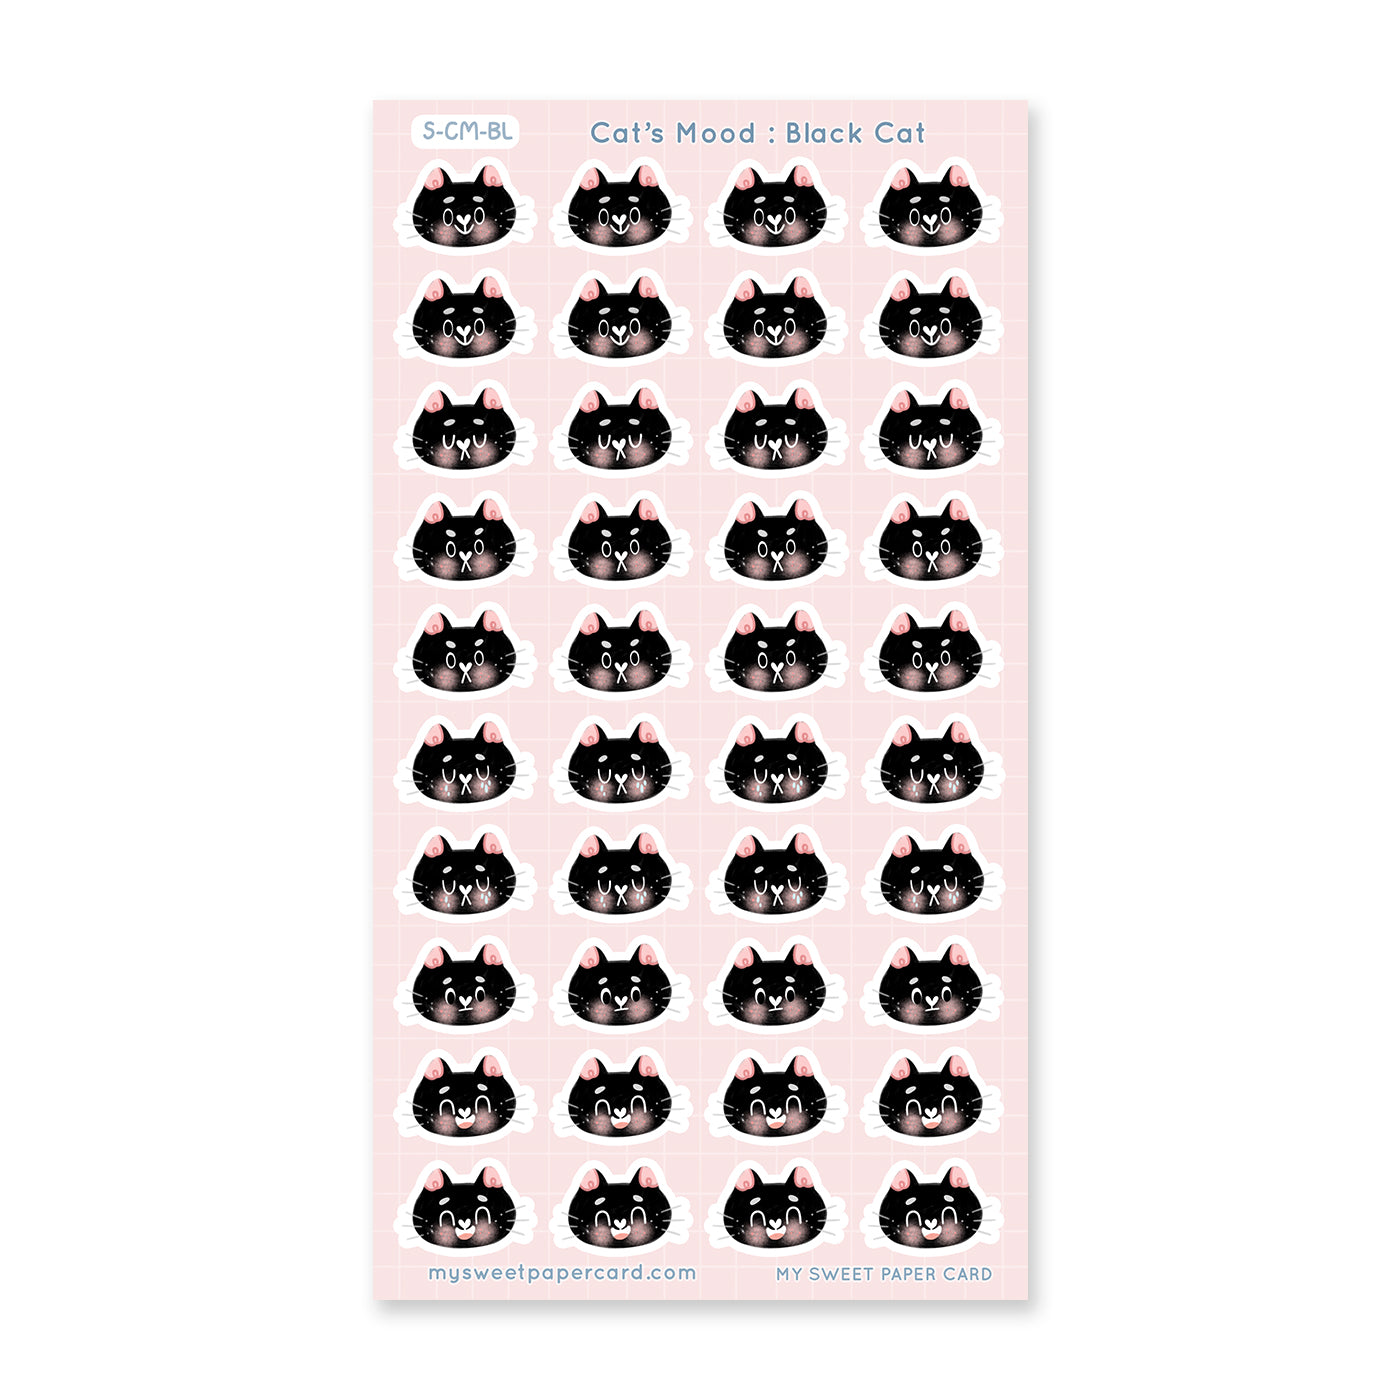 black cat stickers sheet with different moods